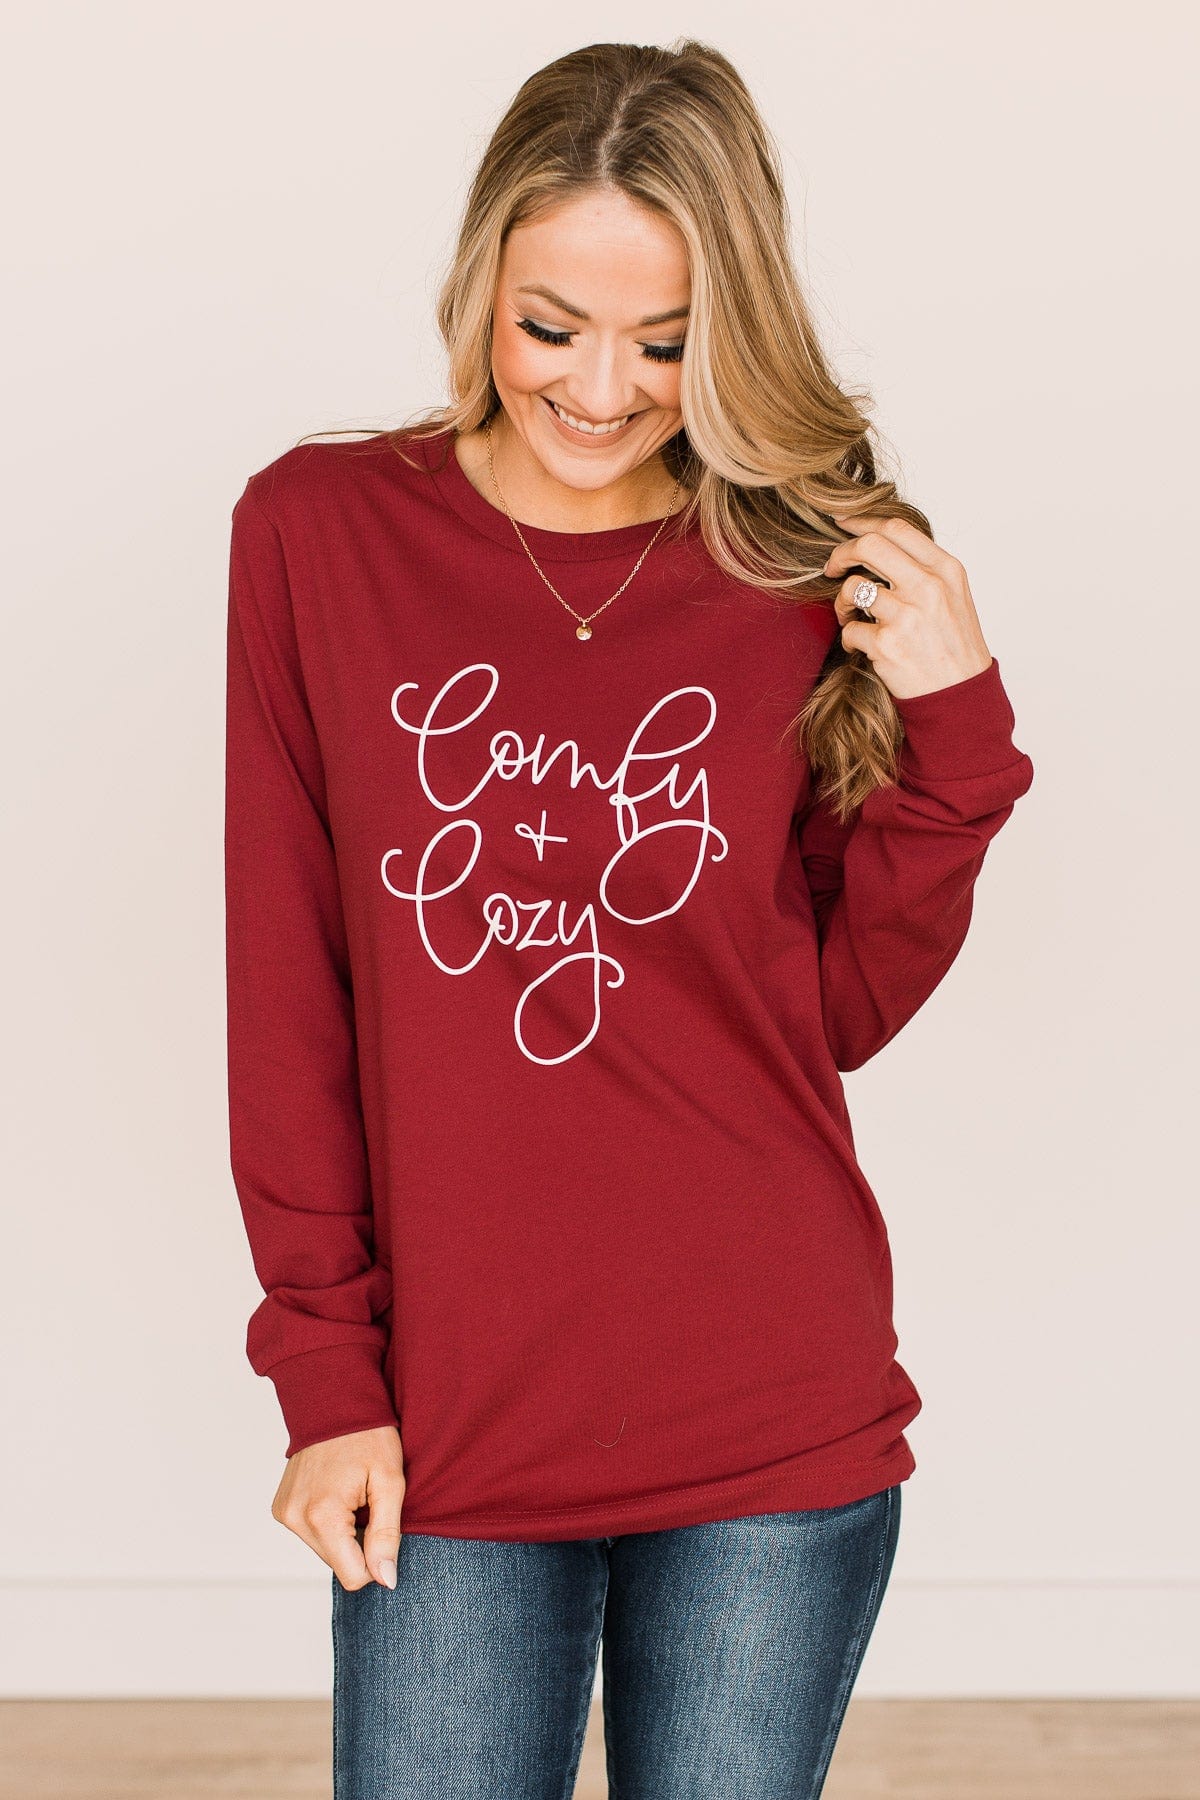 "Comfy & Cozy" Graphic Tee- Cardinal Red